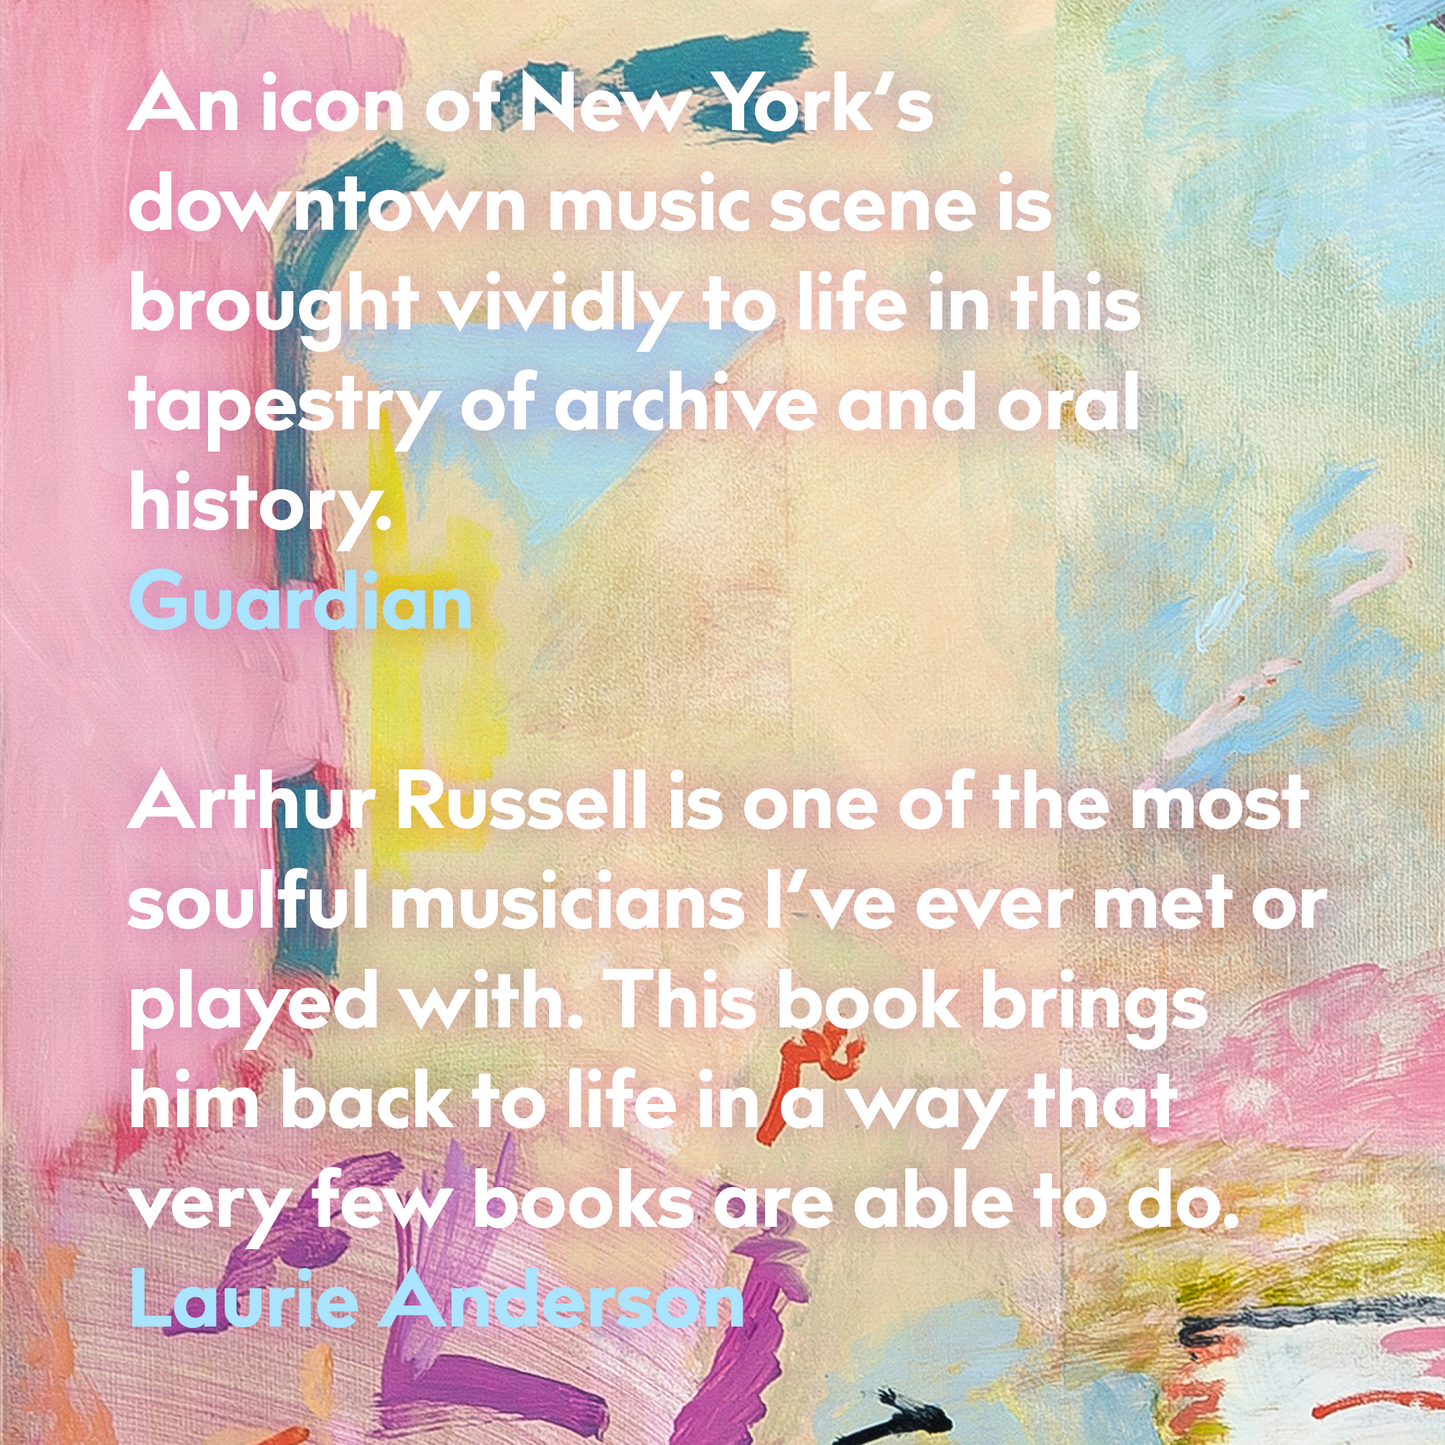 Travels Over Feeling: Richard King on the life of Arthur Russell